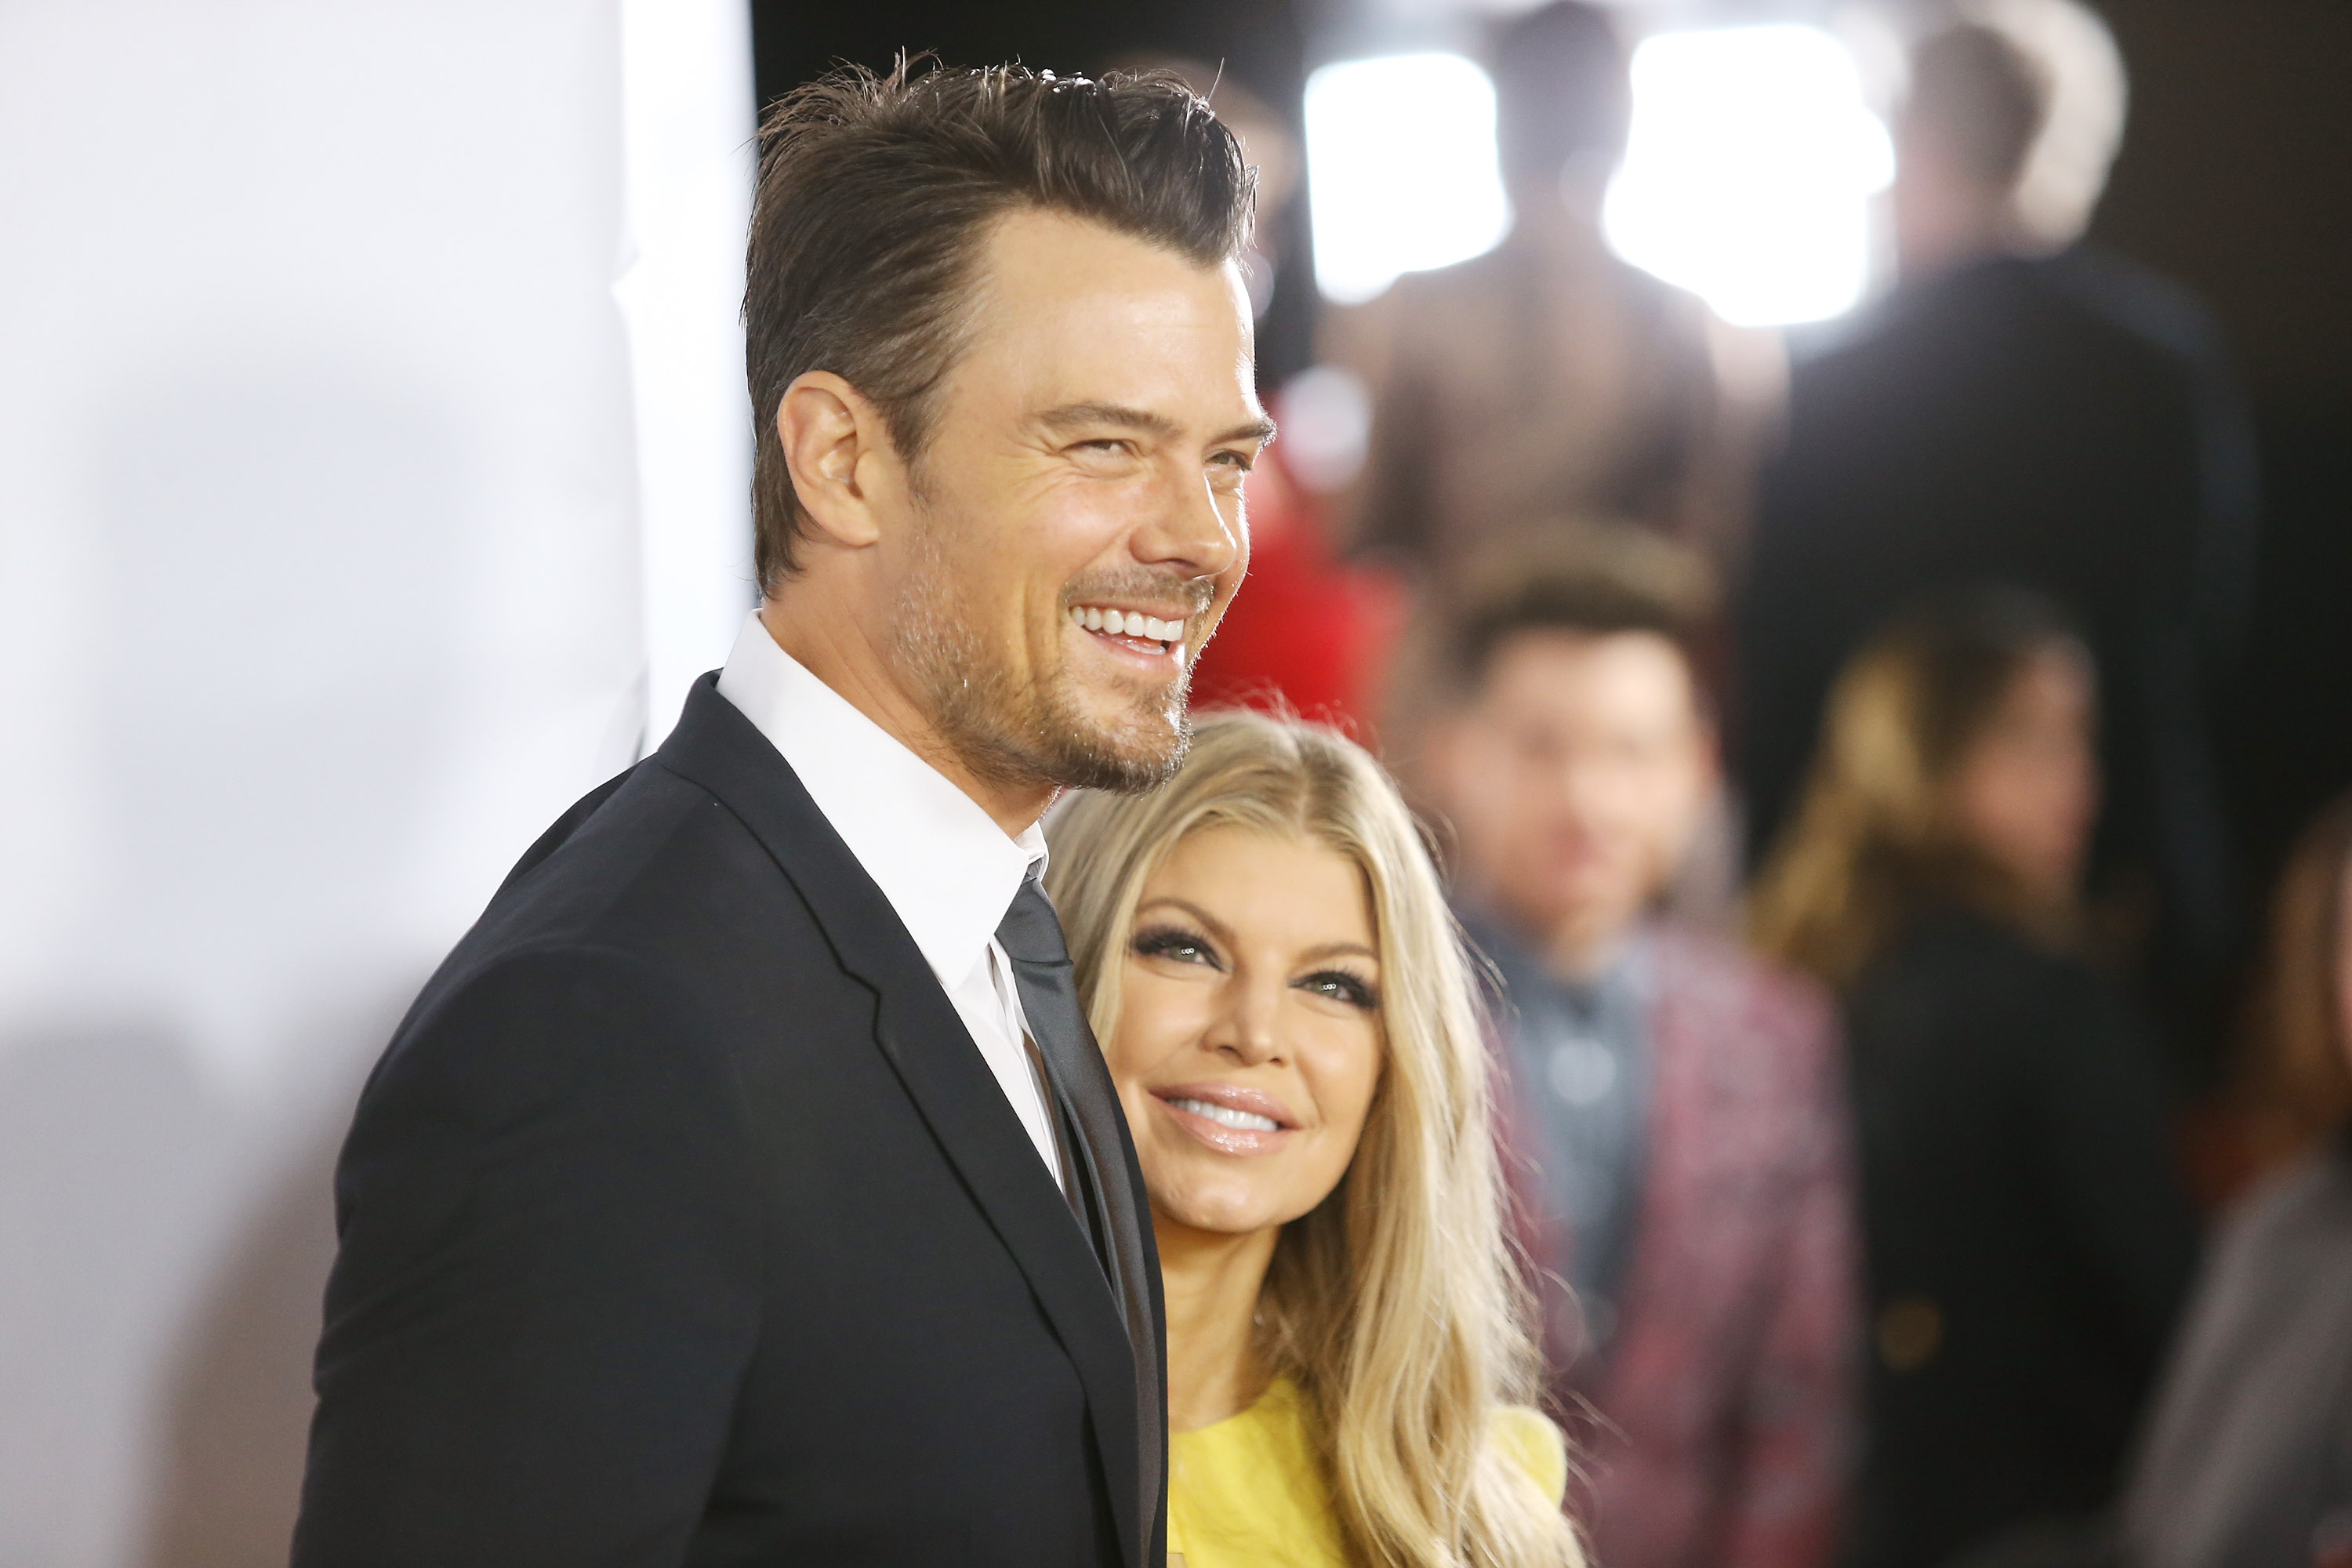 Actor Josh Duhamel and singer Fergie arrive at the 15th Annual Trevor Project Benefit at Hollywood Palladium on December 8, 2013 in Hollywood, California | Source: Getty Images